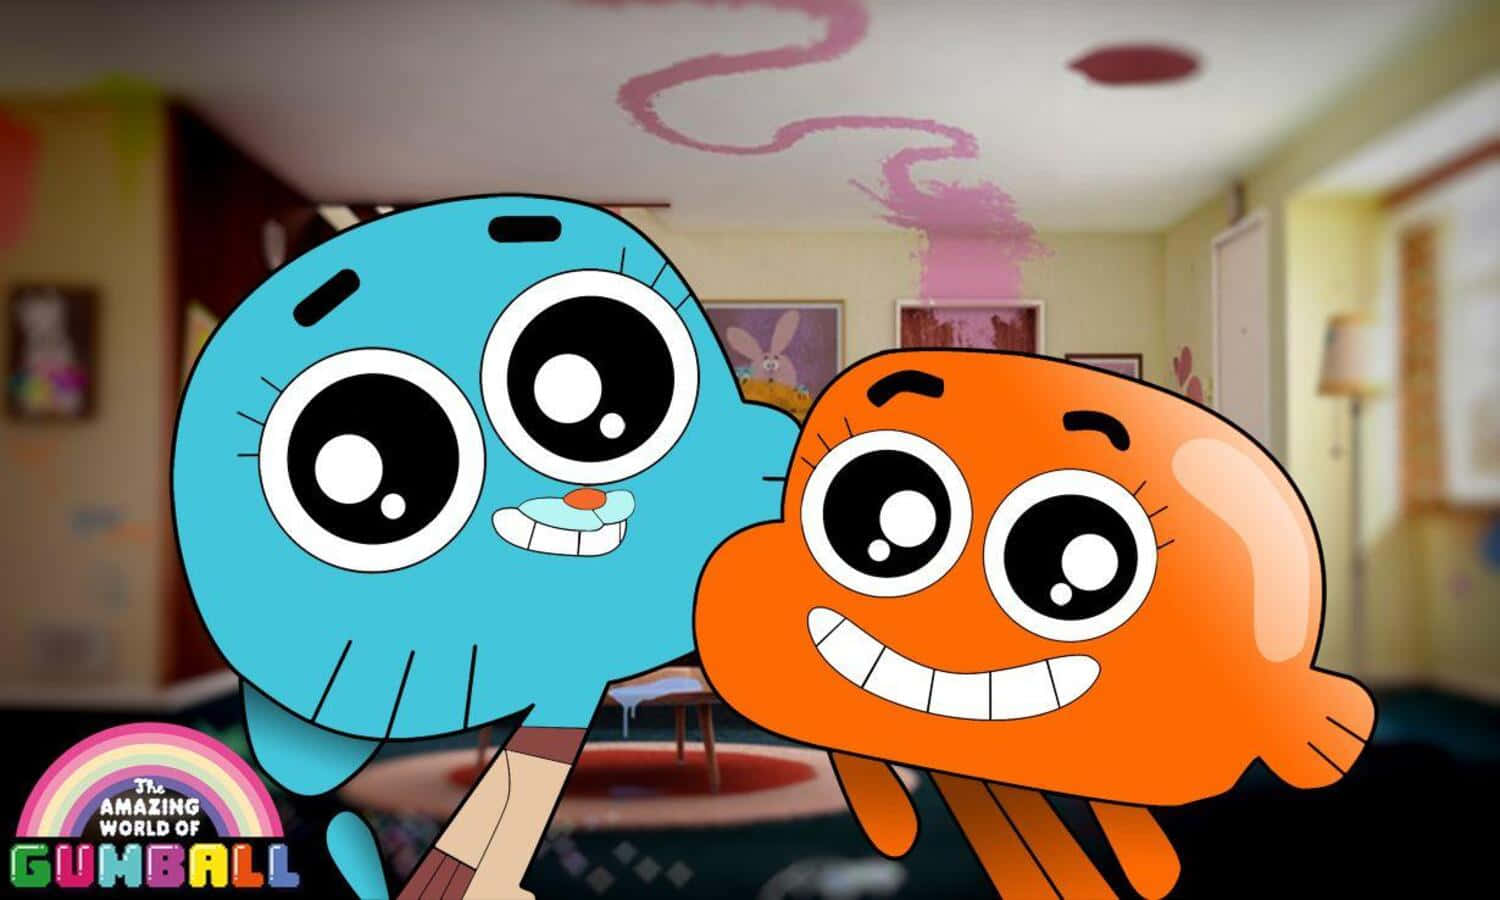 Darwin Wallpaper  Gumball Wallpapers Free Download For Phone and iPhone   Best Wallpapers